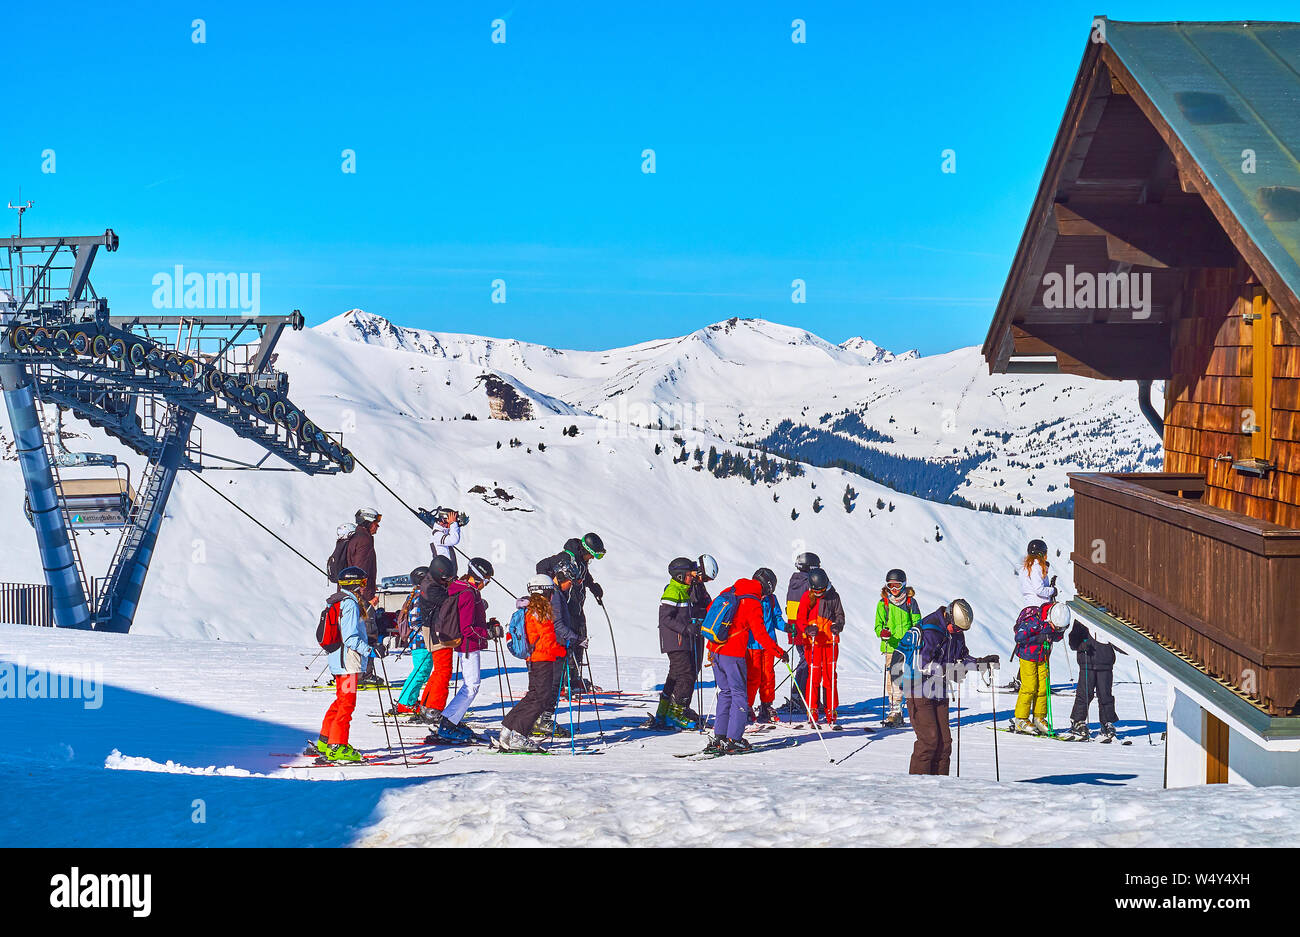 ZELL AM SEE, AUSTRIA - FEBRUARY 28, 2019: The group of young skiers at the start of downhill on top of Schmittenhohe mount, next to the ski lift, on F Stock Photo